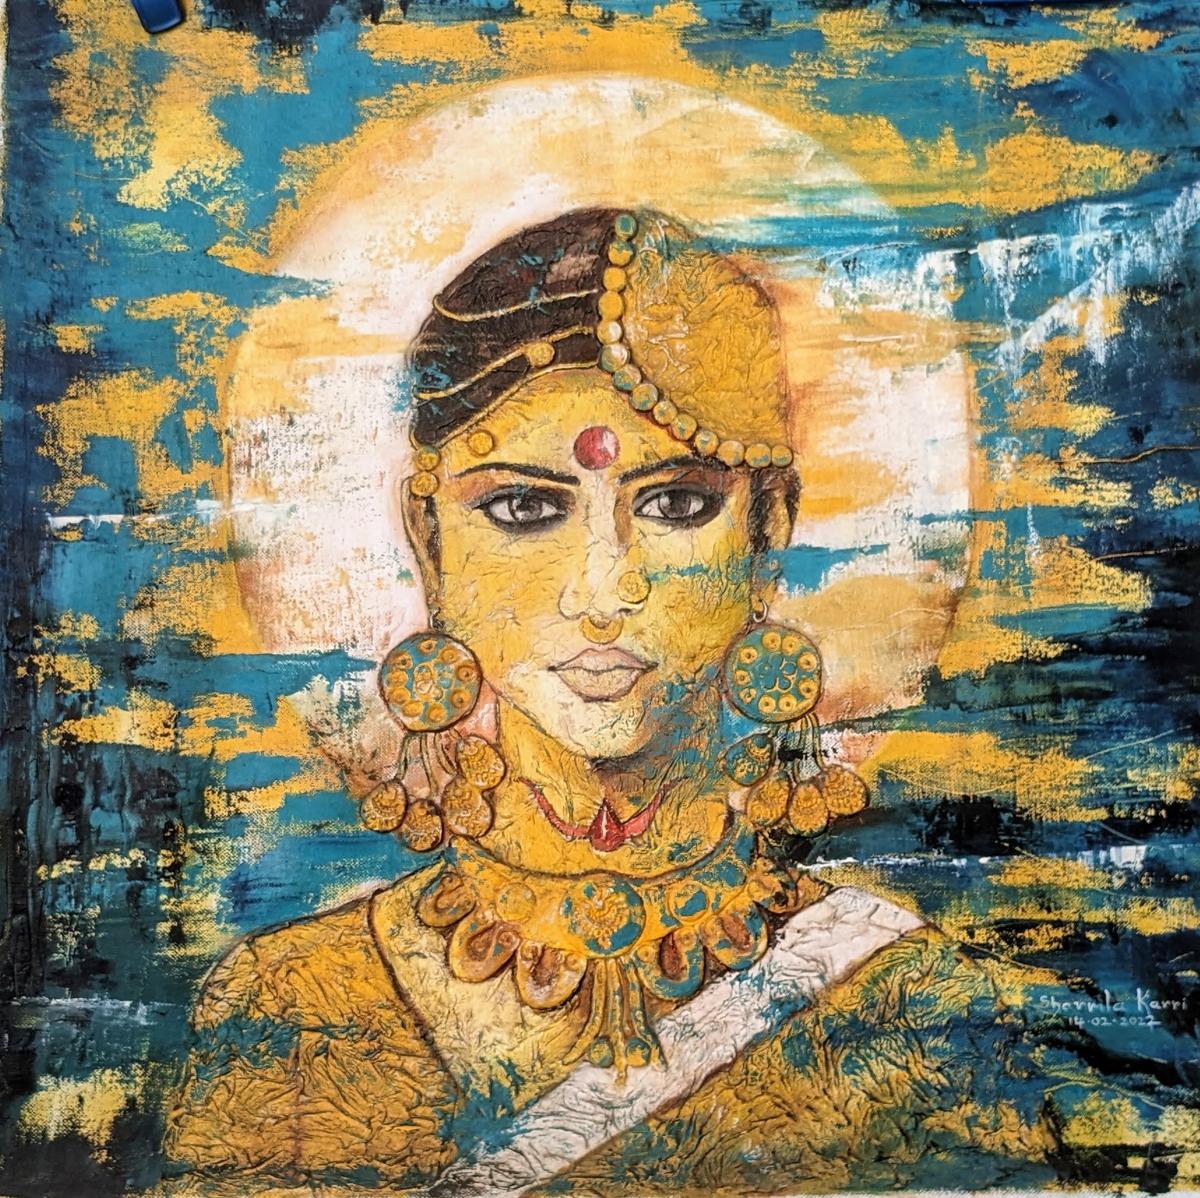 An art work of artist Sharmla Karri that will be showcased during a group show at Hawa Mahal in Visakhapatnam. 